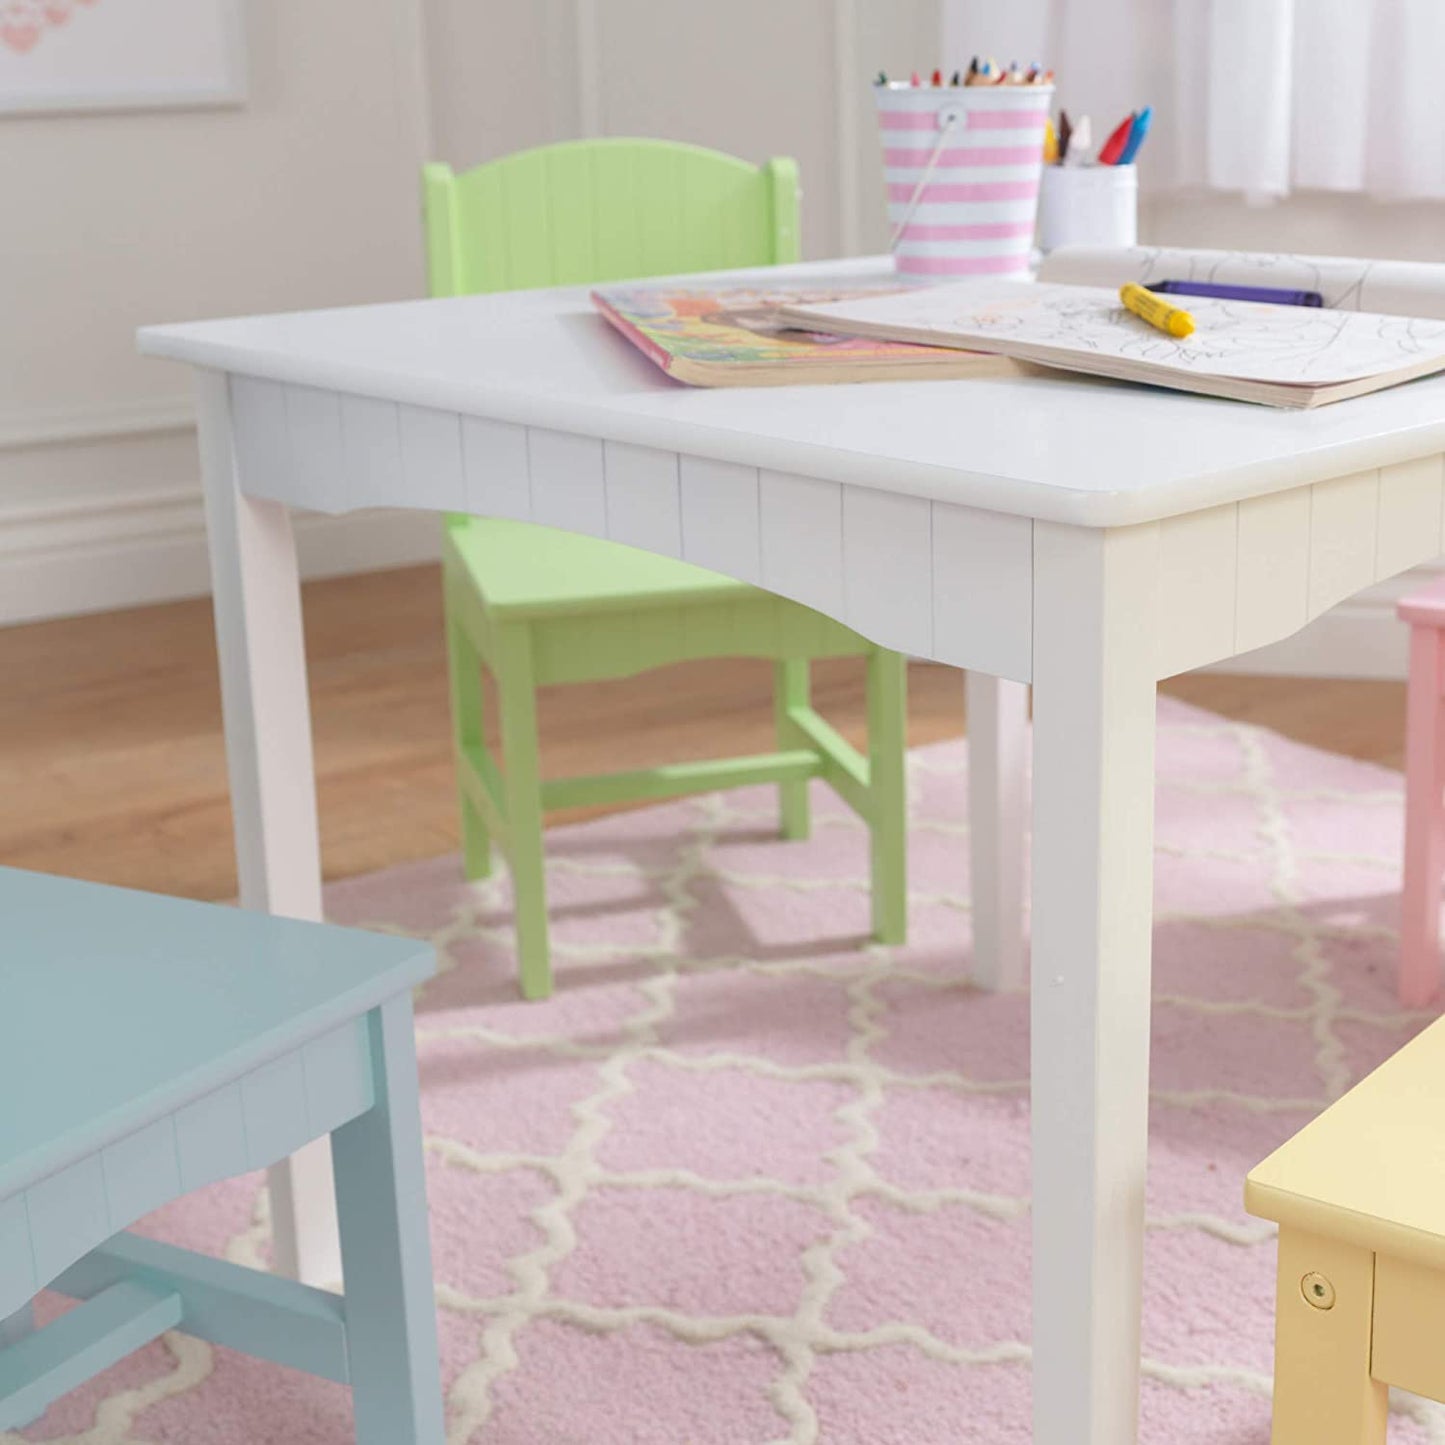 Nantucket Kid's Wooden Table & 4 Chairs Set with Wainscoting Detail, Pastel ,Gift for Ages 3-8